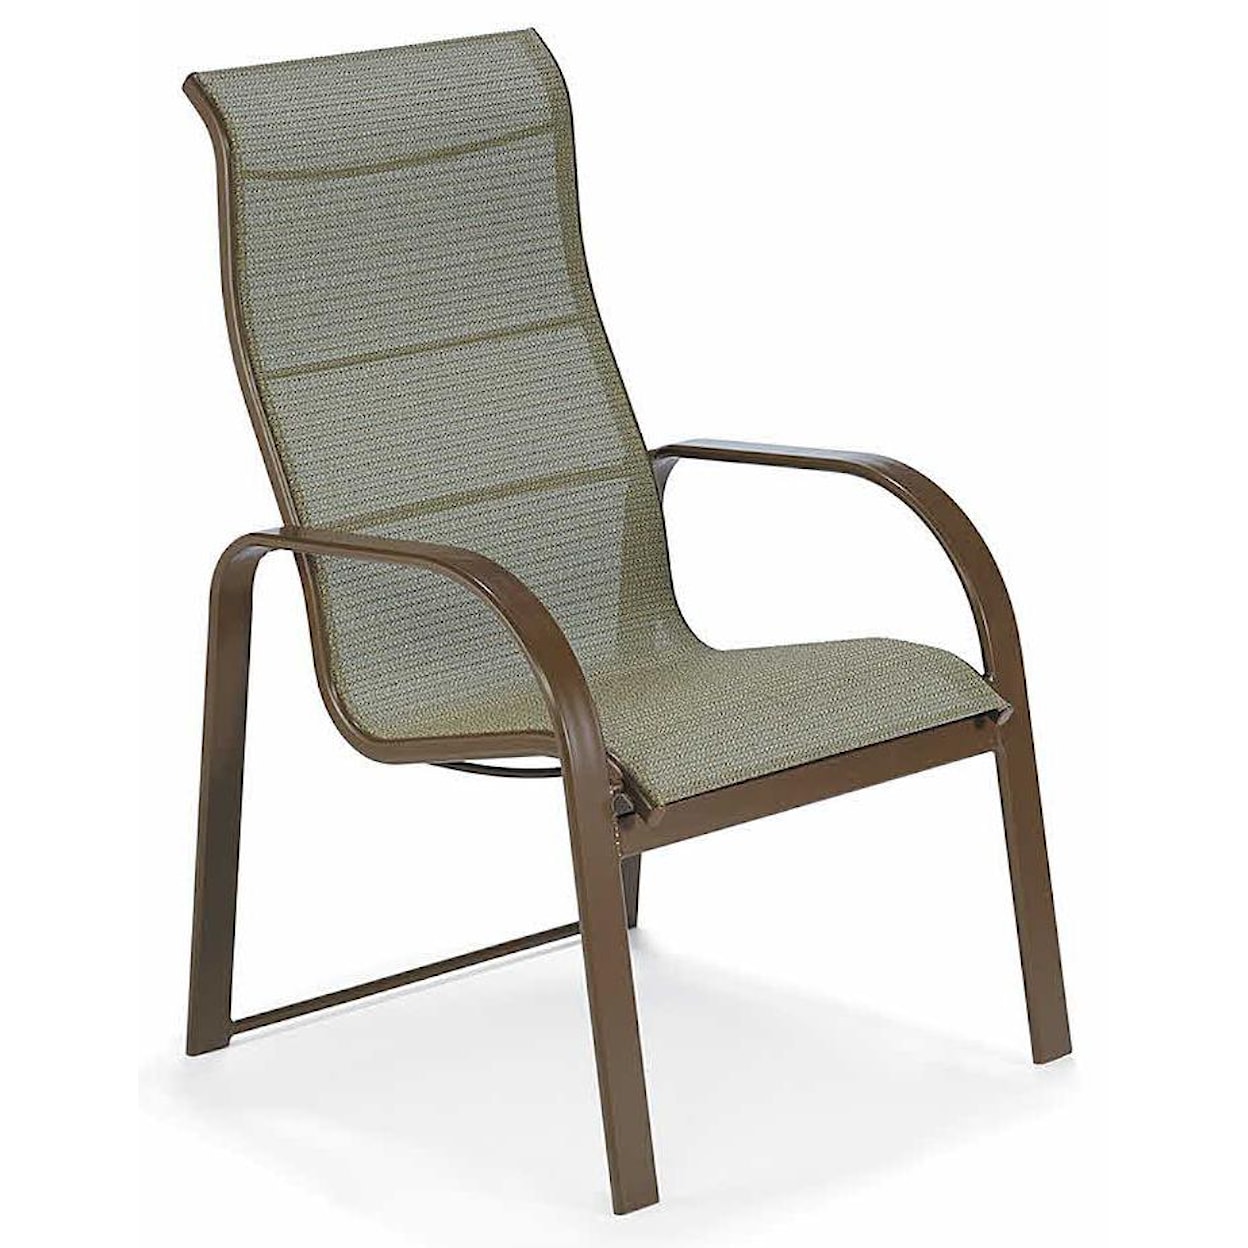 Winston Seagrove II Sling Ultimate High Back Sling Dining Chair